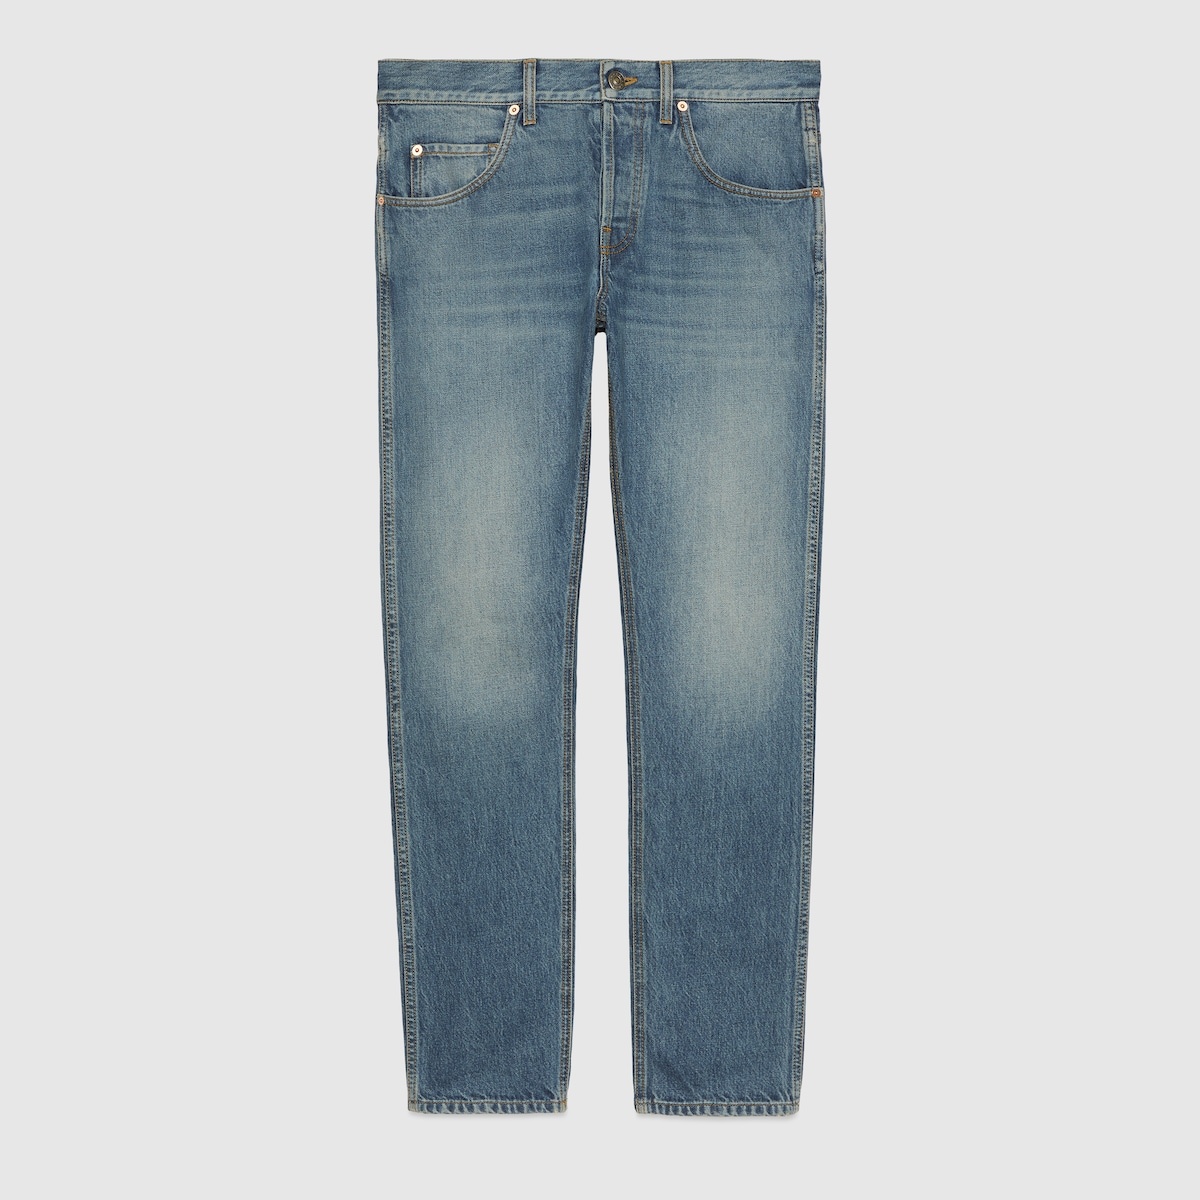 Denim pant with leather label - 1